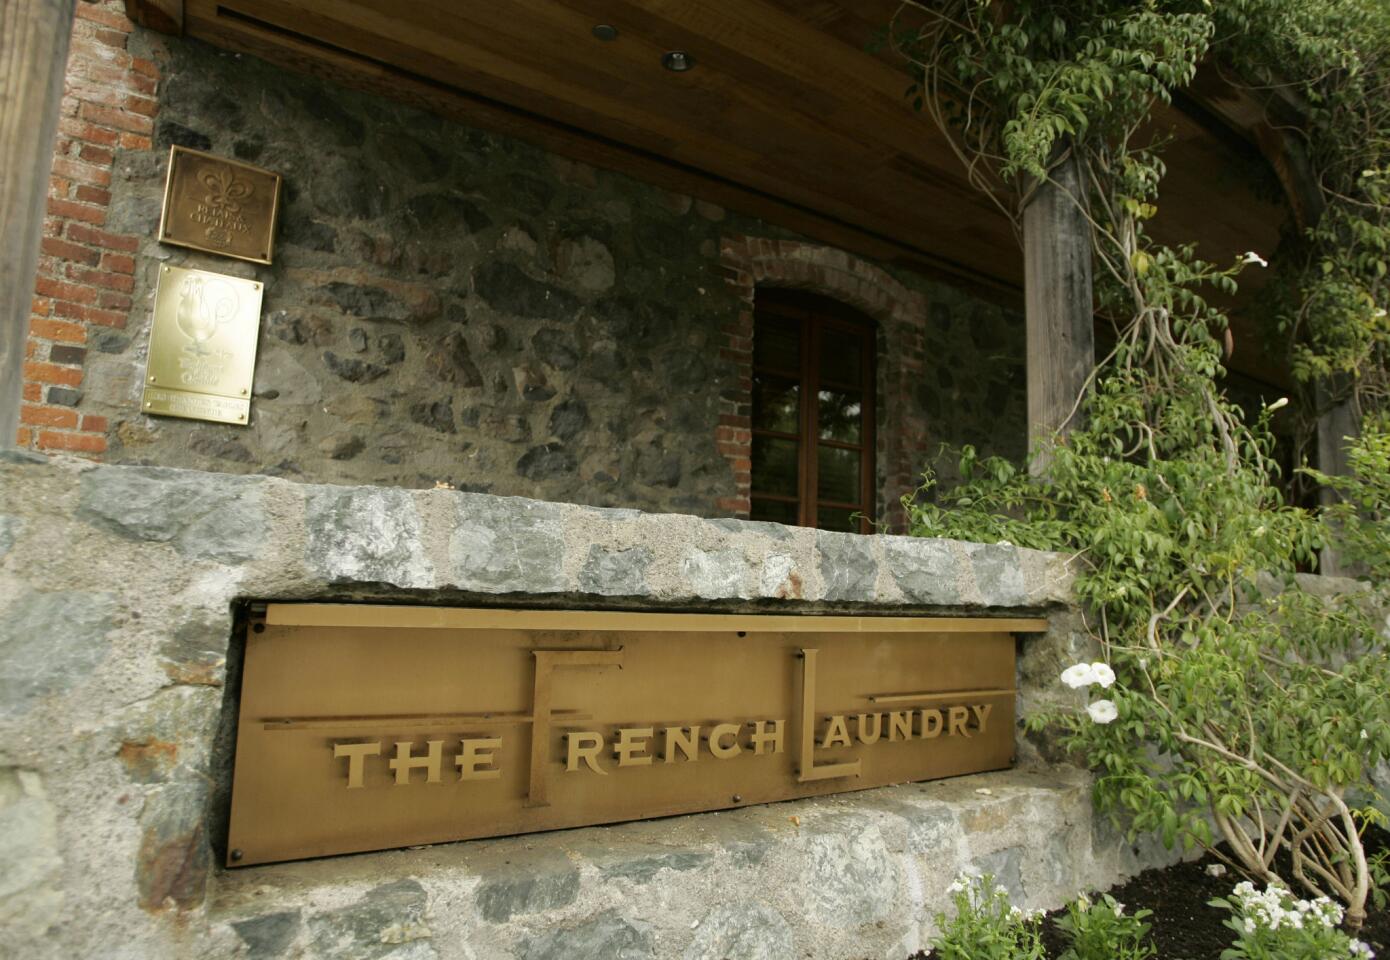 The exterior of the French Laundry restaurant in Yountville, Calif.